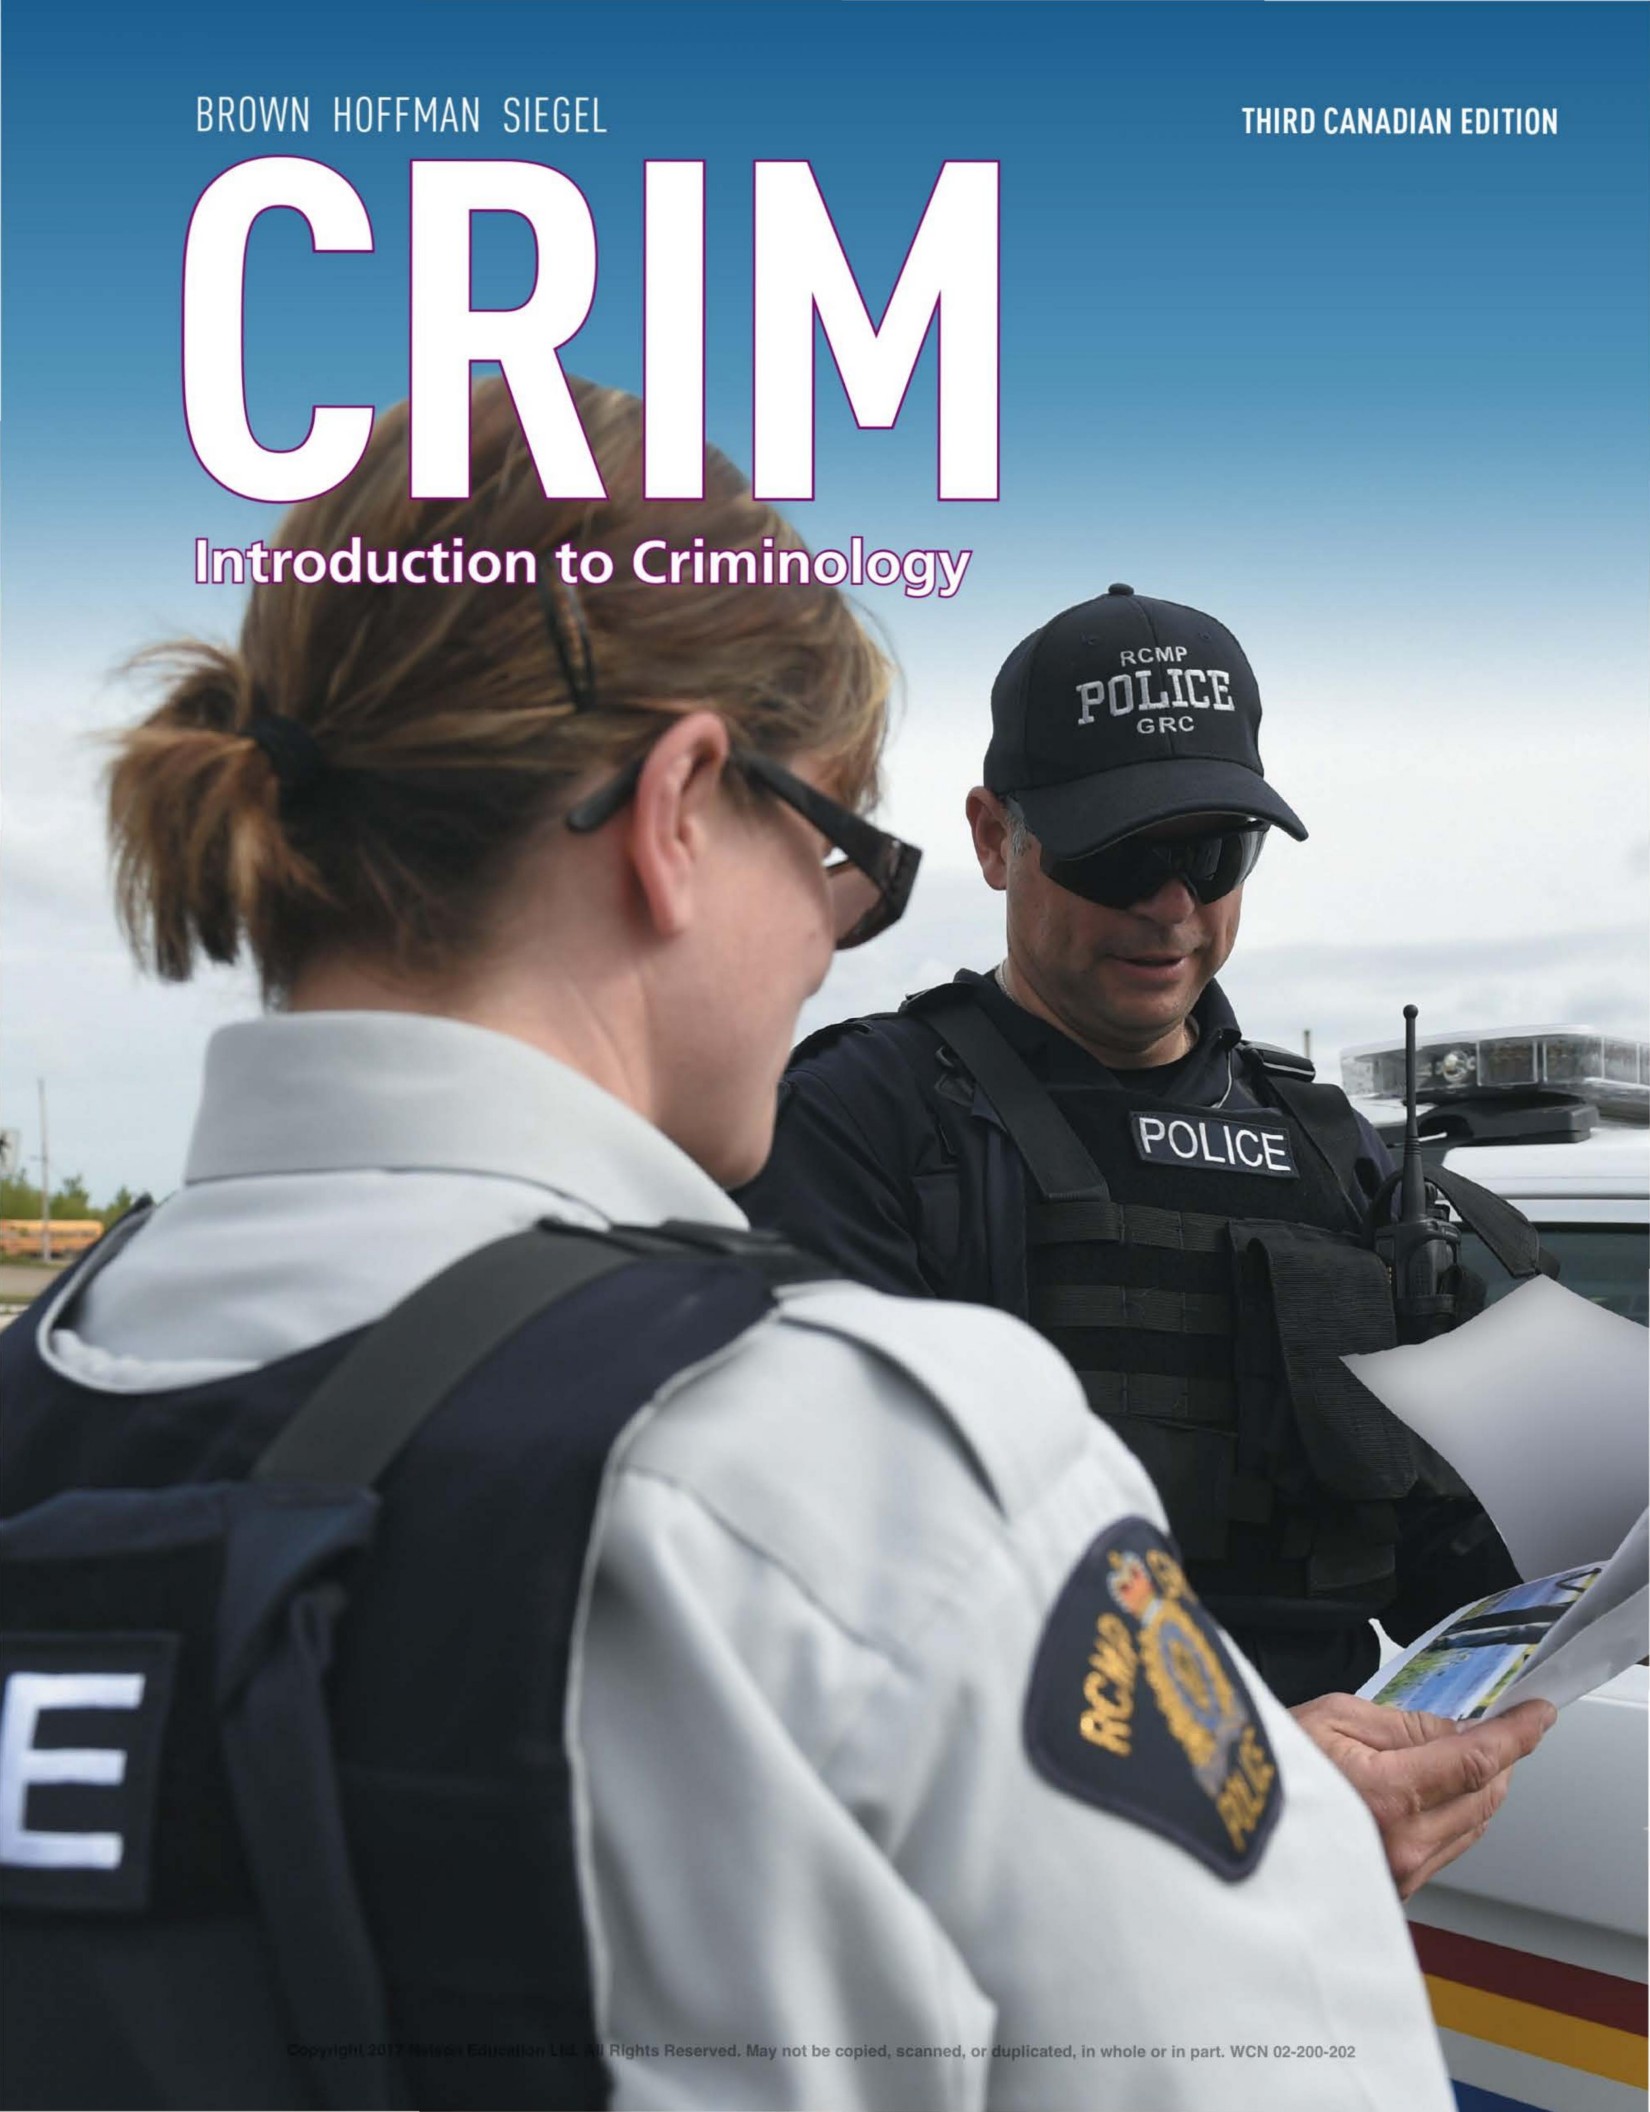 CRIM Introduction to Criminology 3rd Edition by Gregory P Brown.jpg